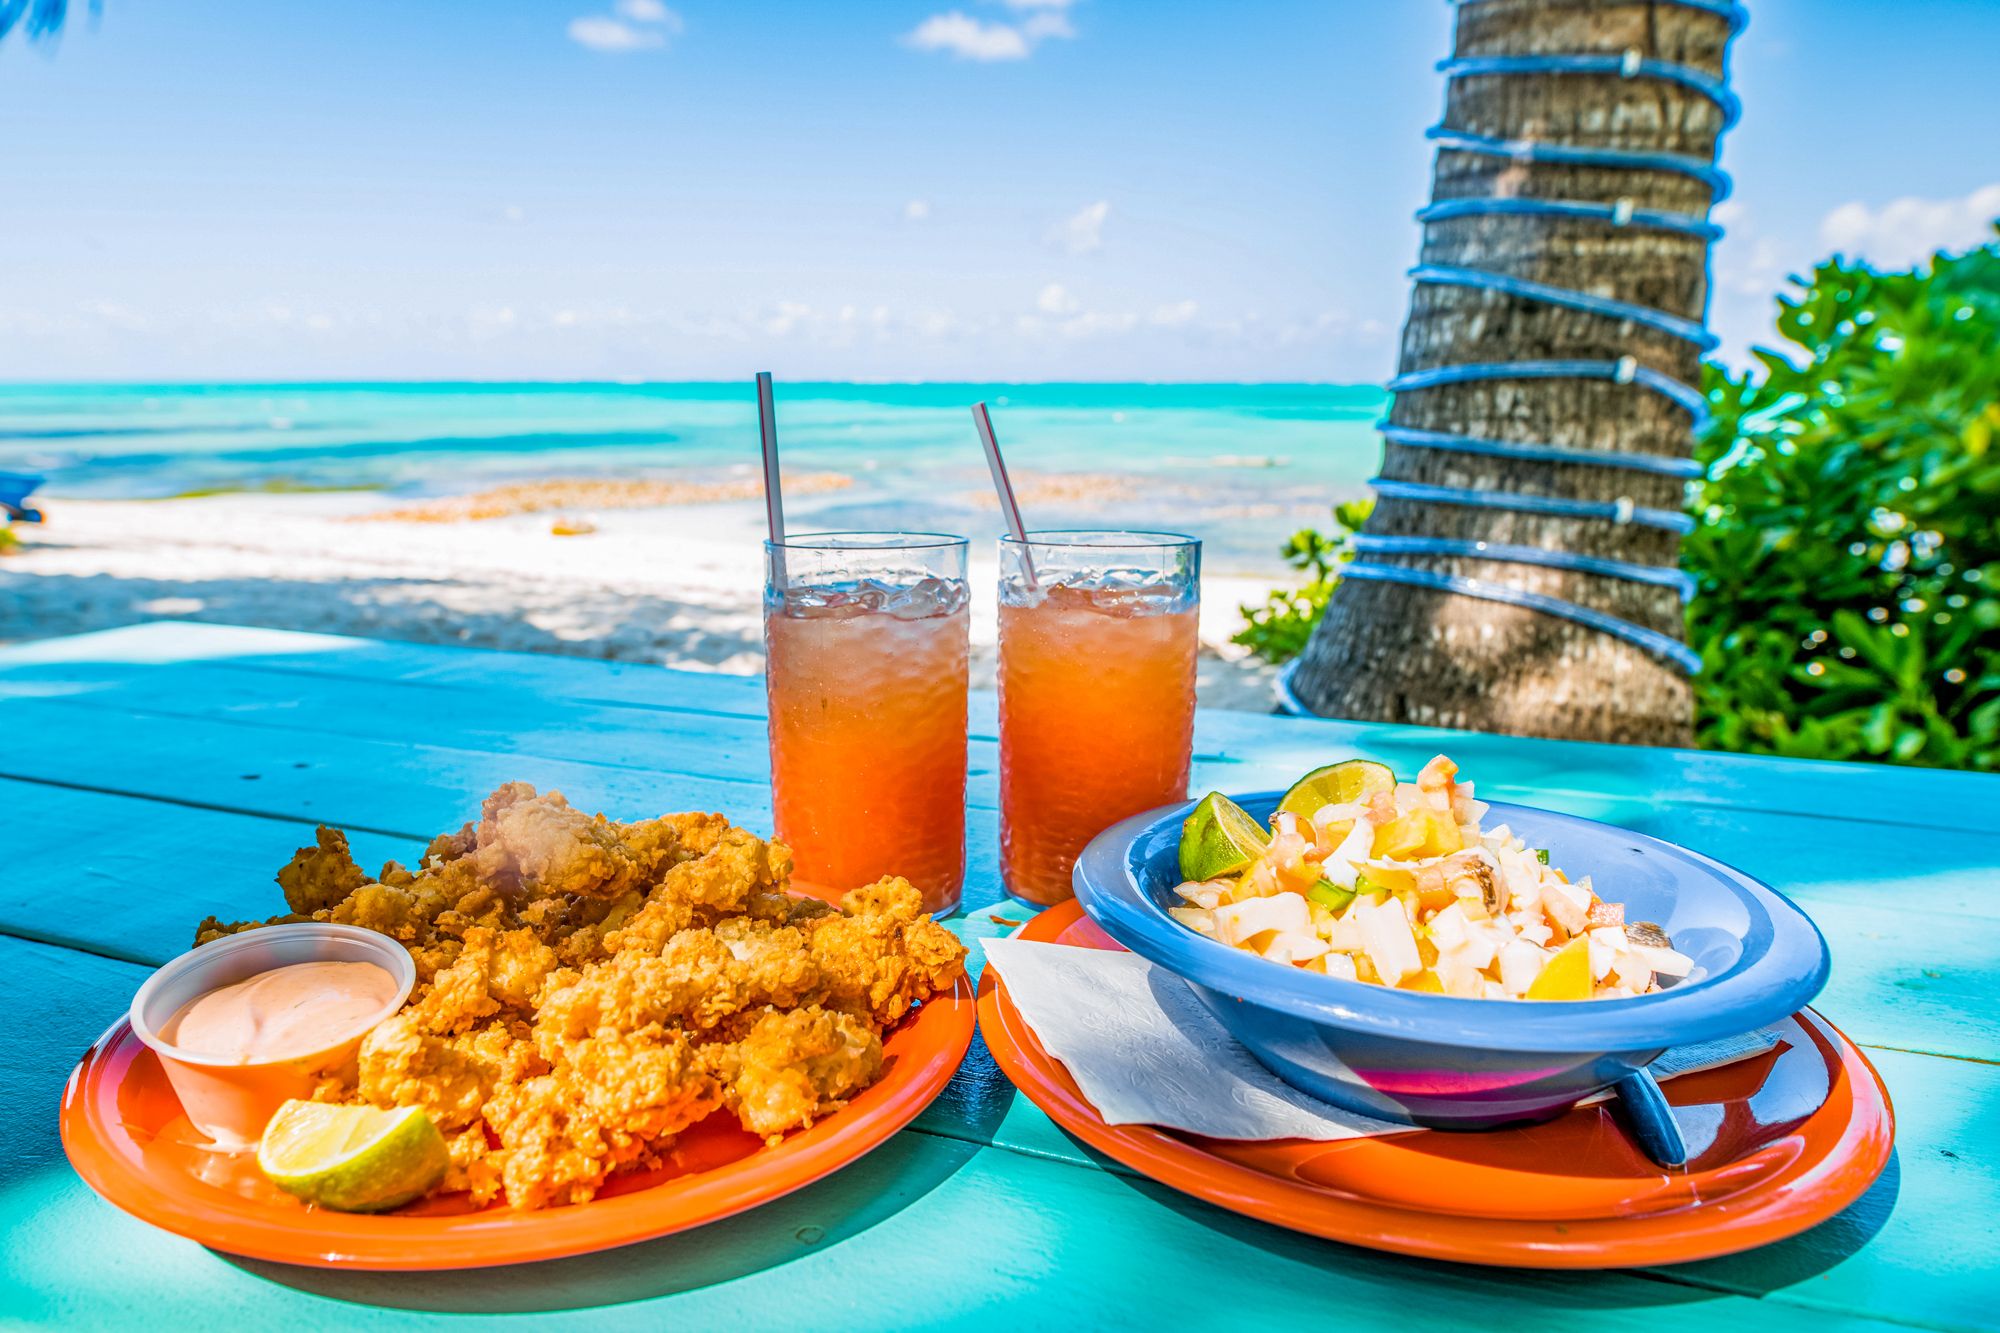 Conch fritters conch salad punch Turks Caicos